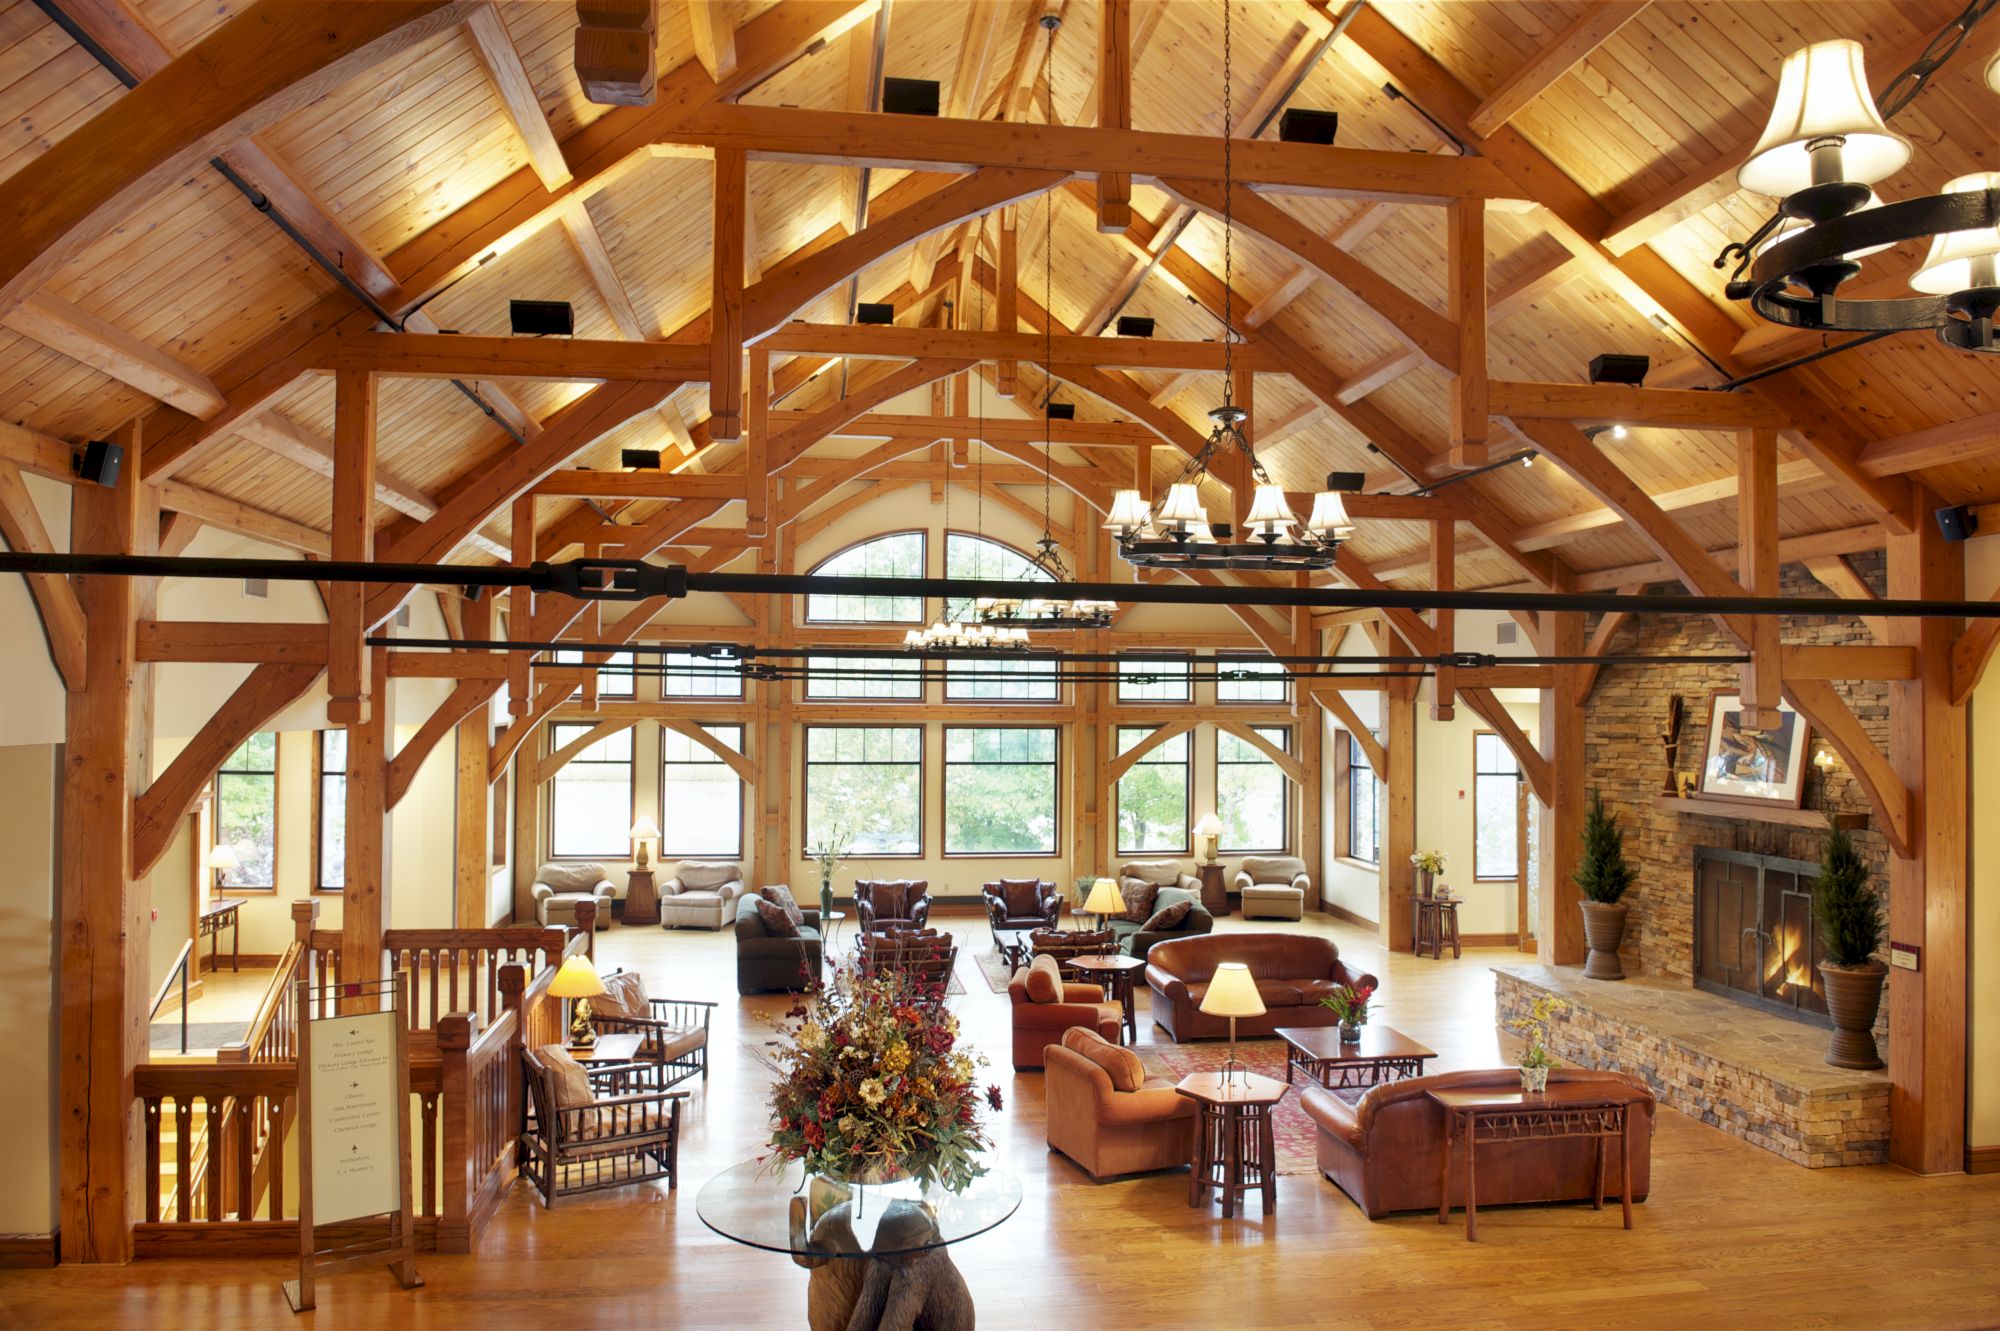 This image shows a spacious, wooden-beamed lodge interior with multiple seating areas, a grand fireplace, large windows, and a chandelier.